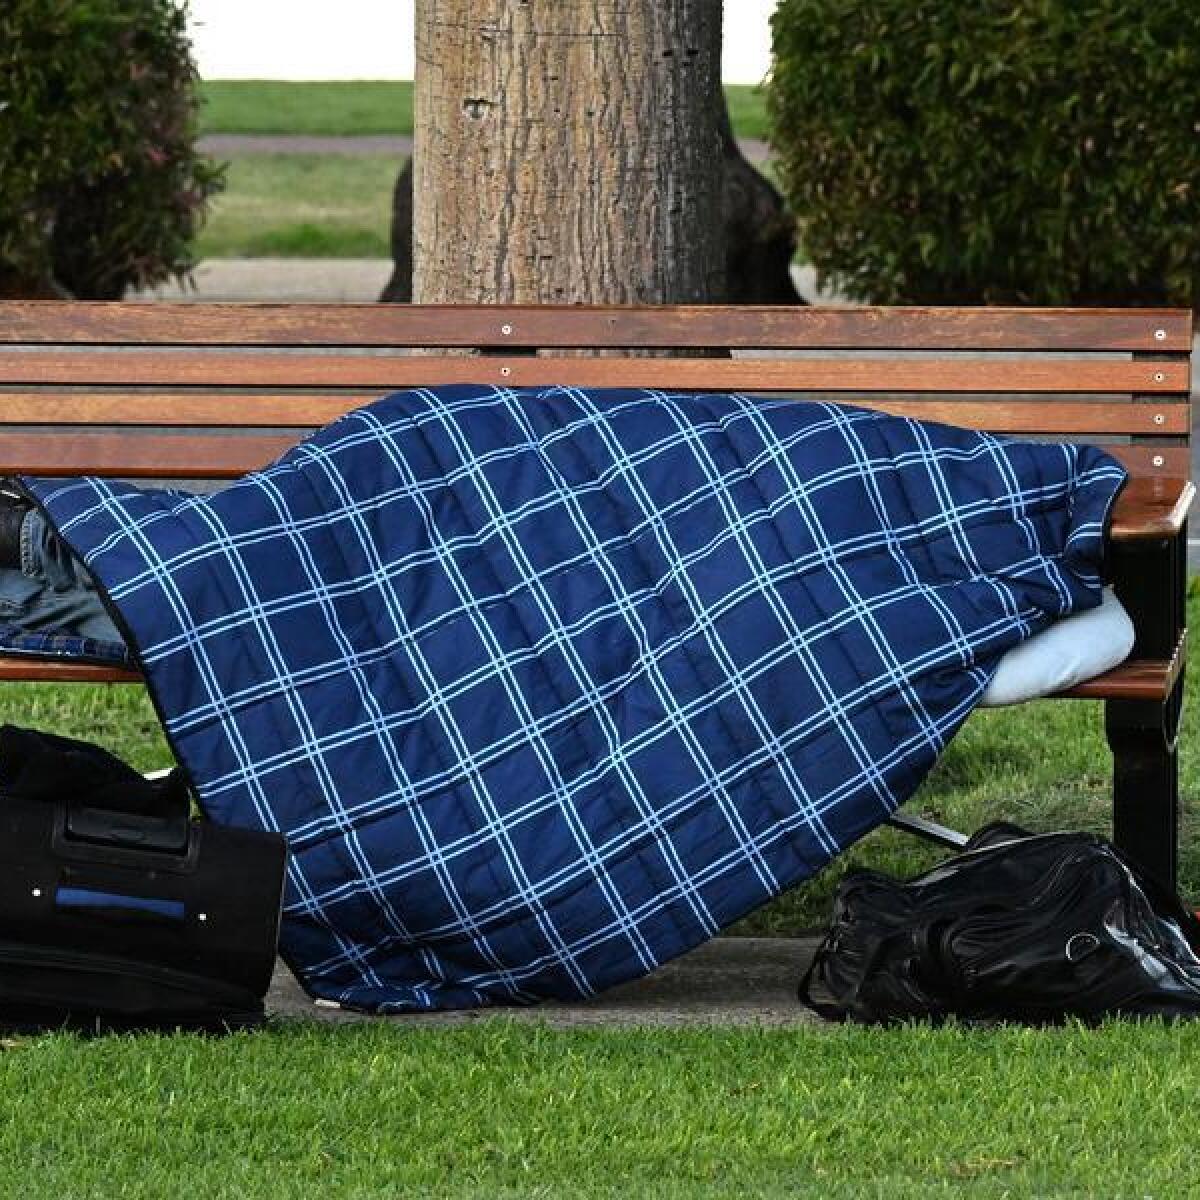 A survey found 2037 people sleeping rough in NSW in February.